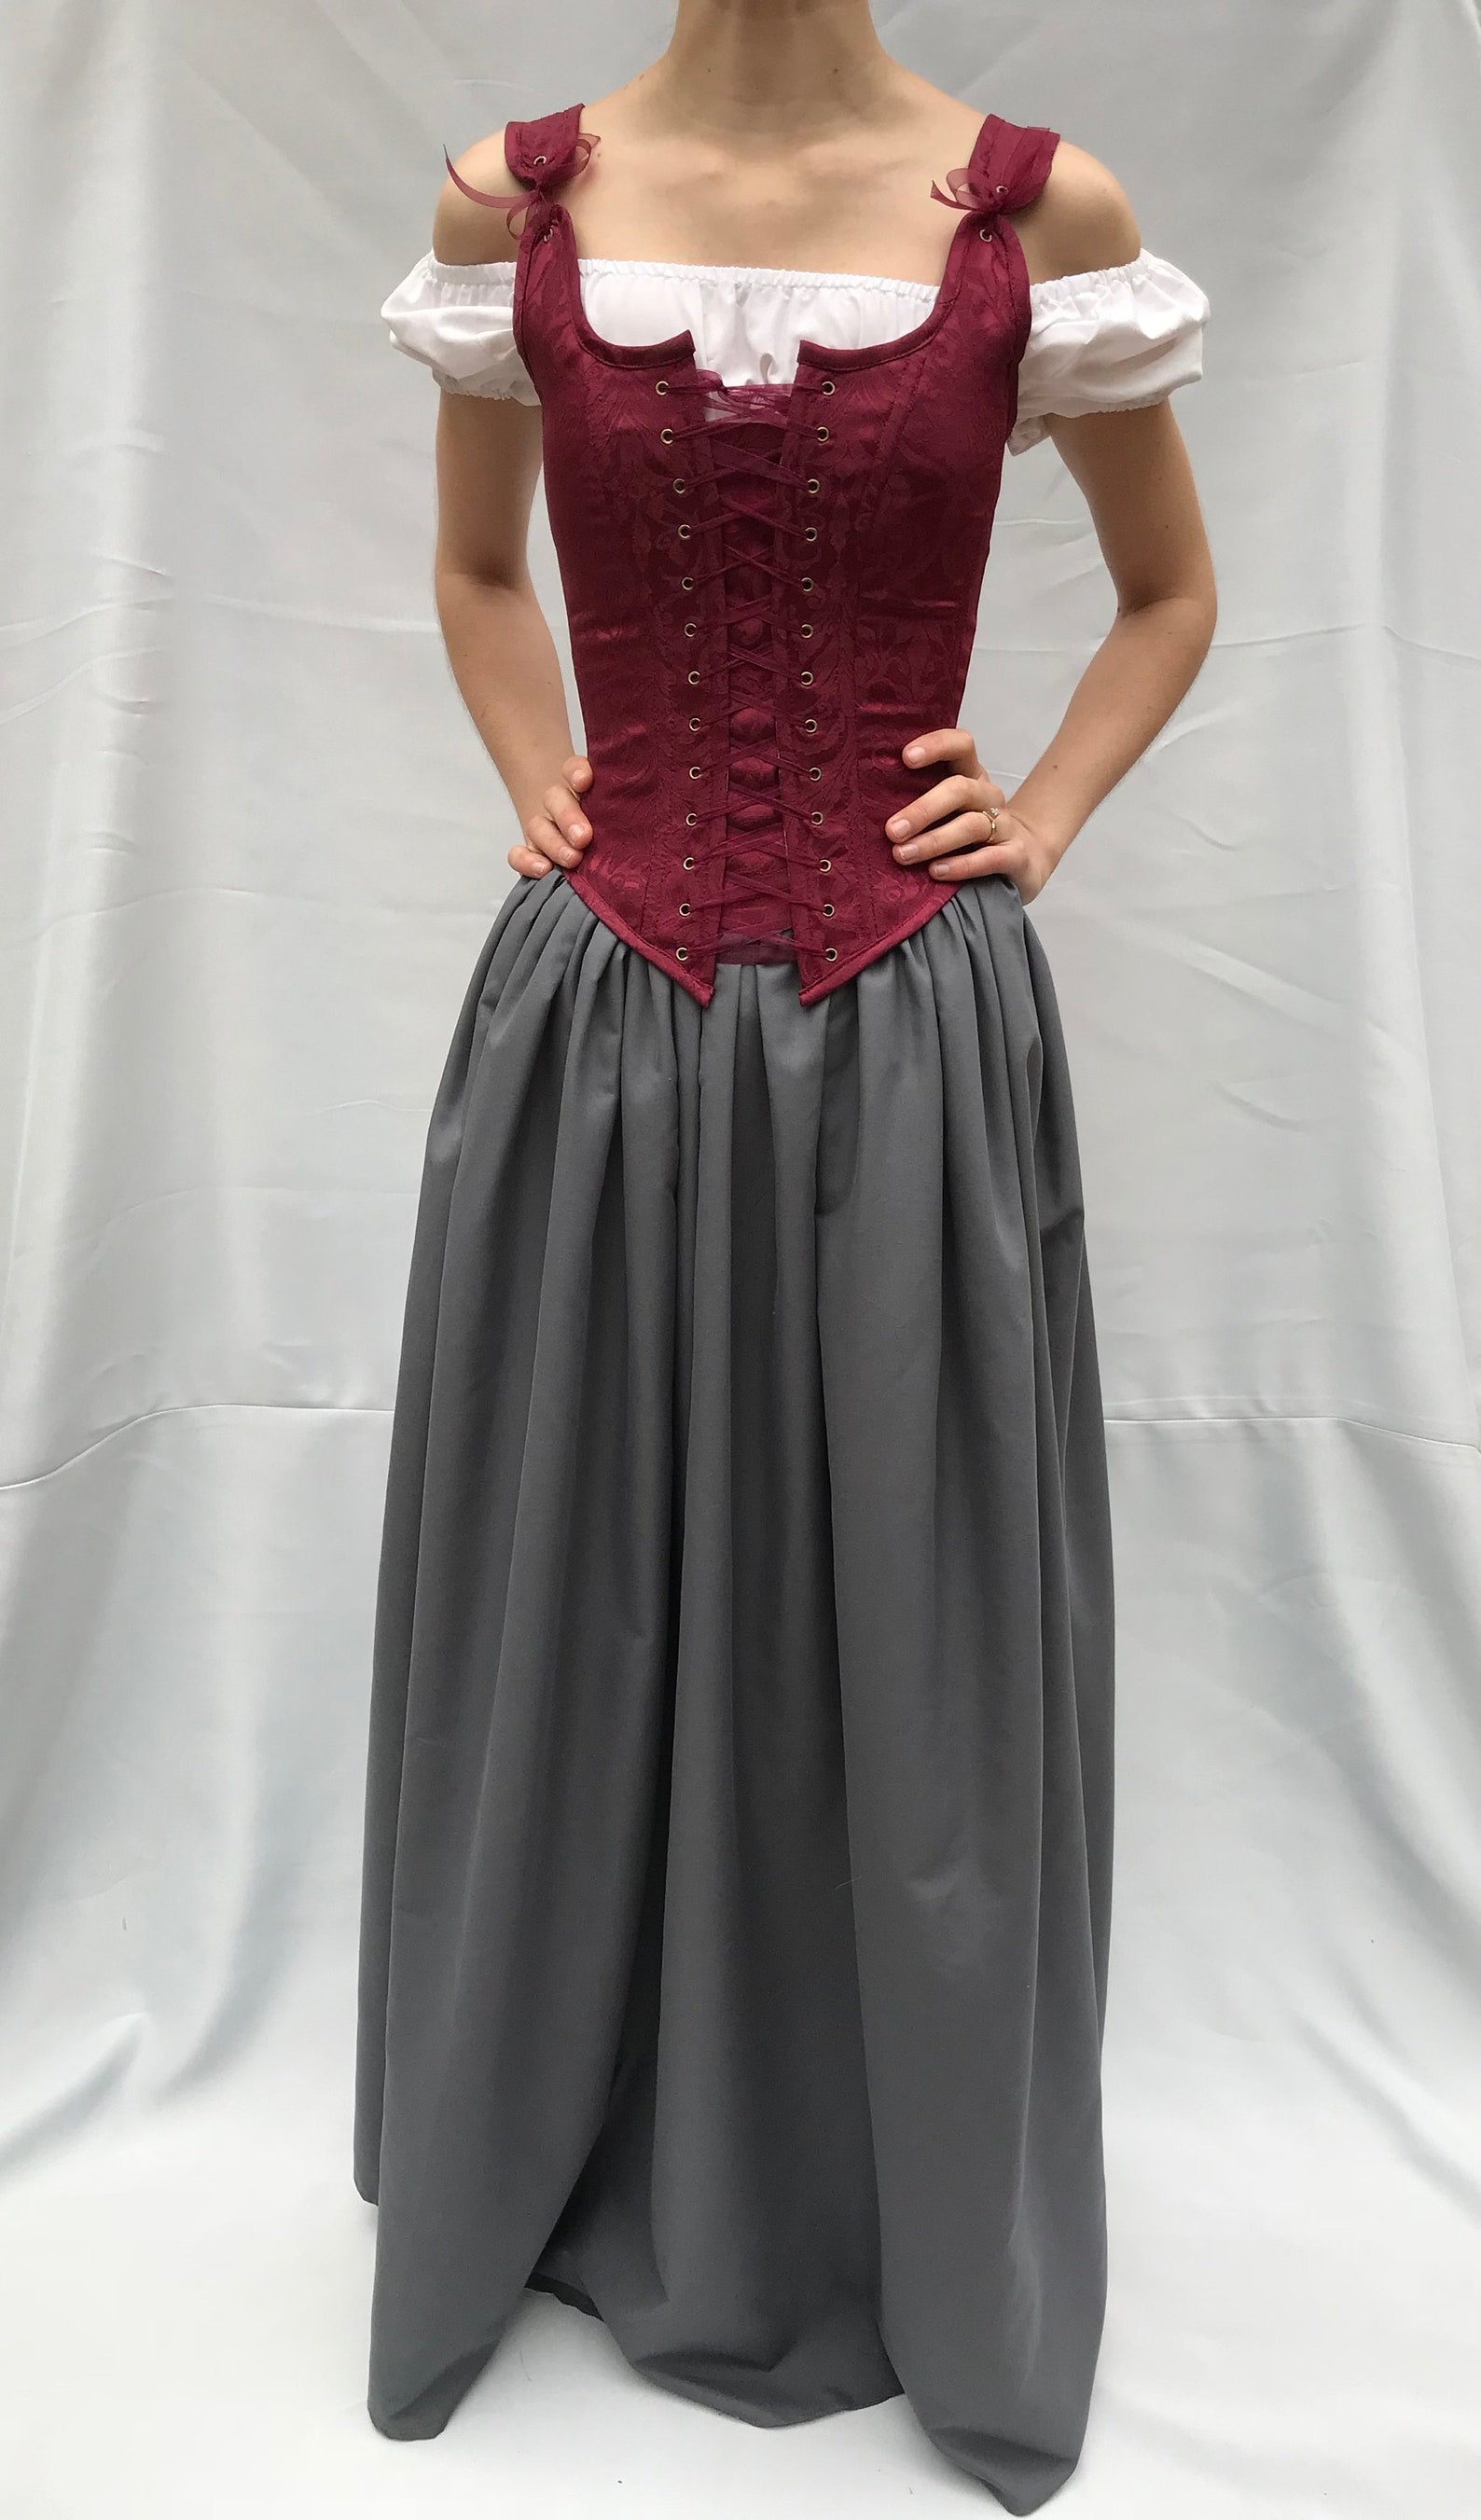 Peasant Bodice Renaissance Corset in Red Wine with Straps | Etsy